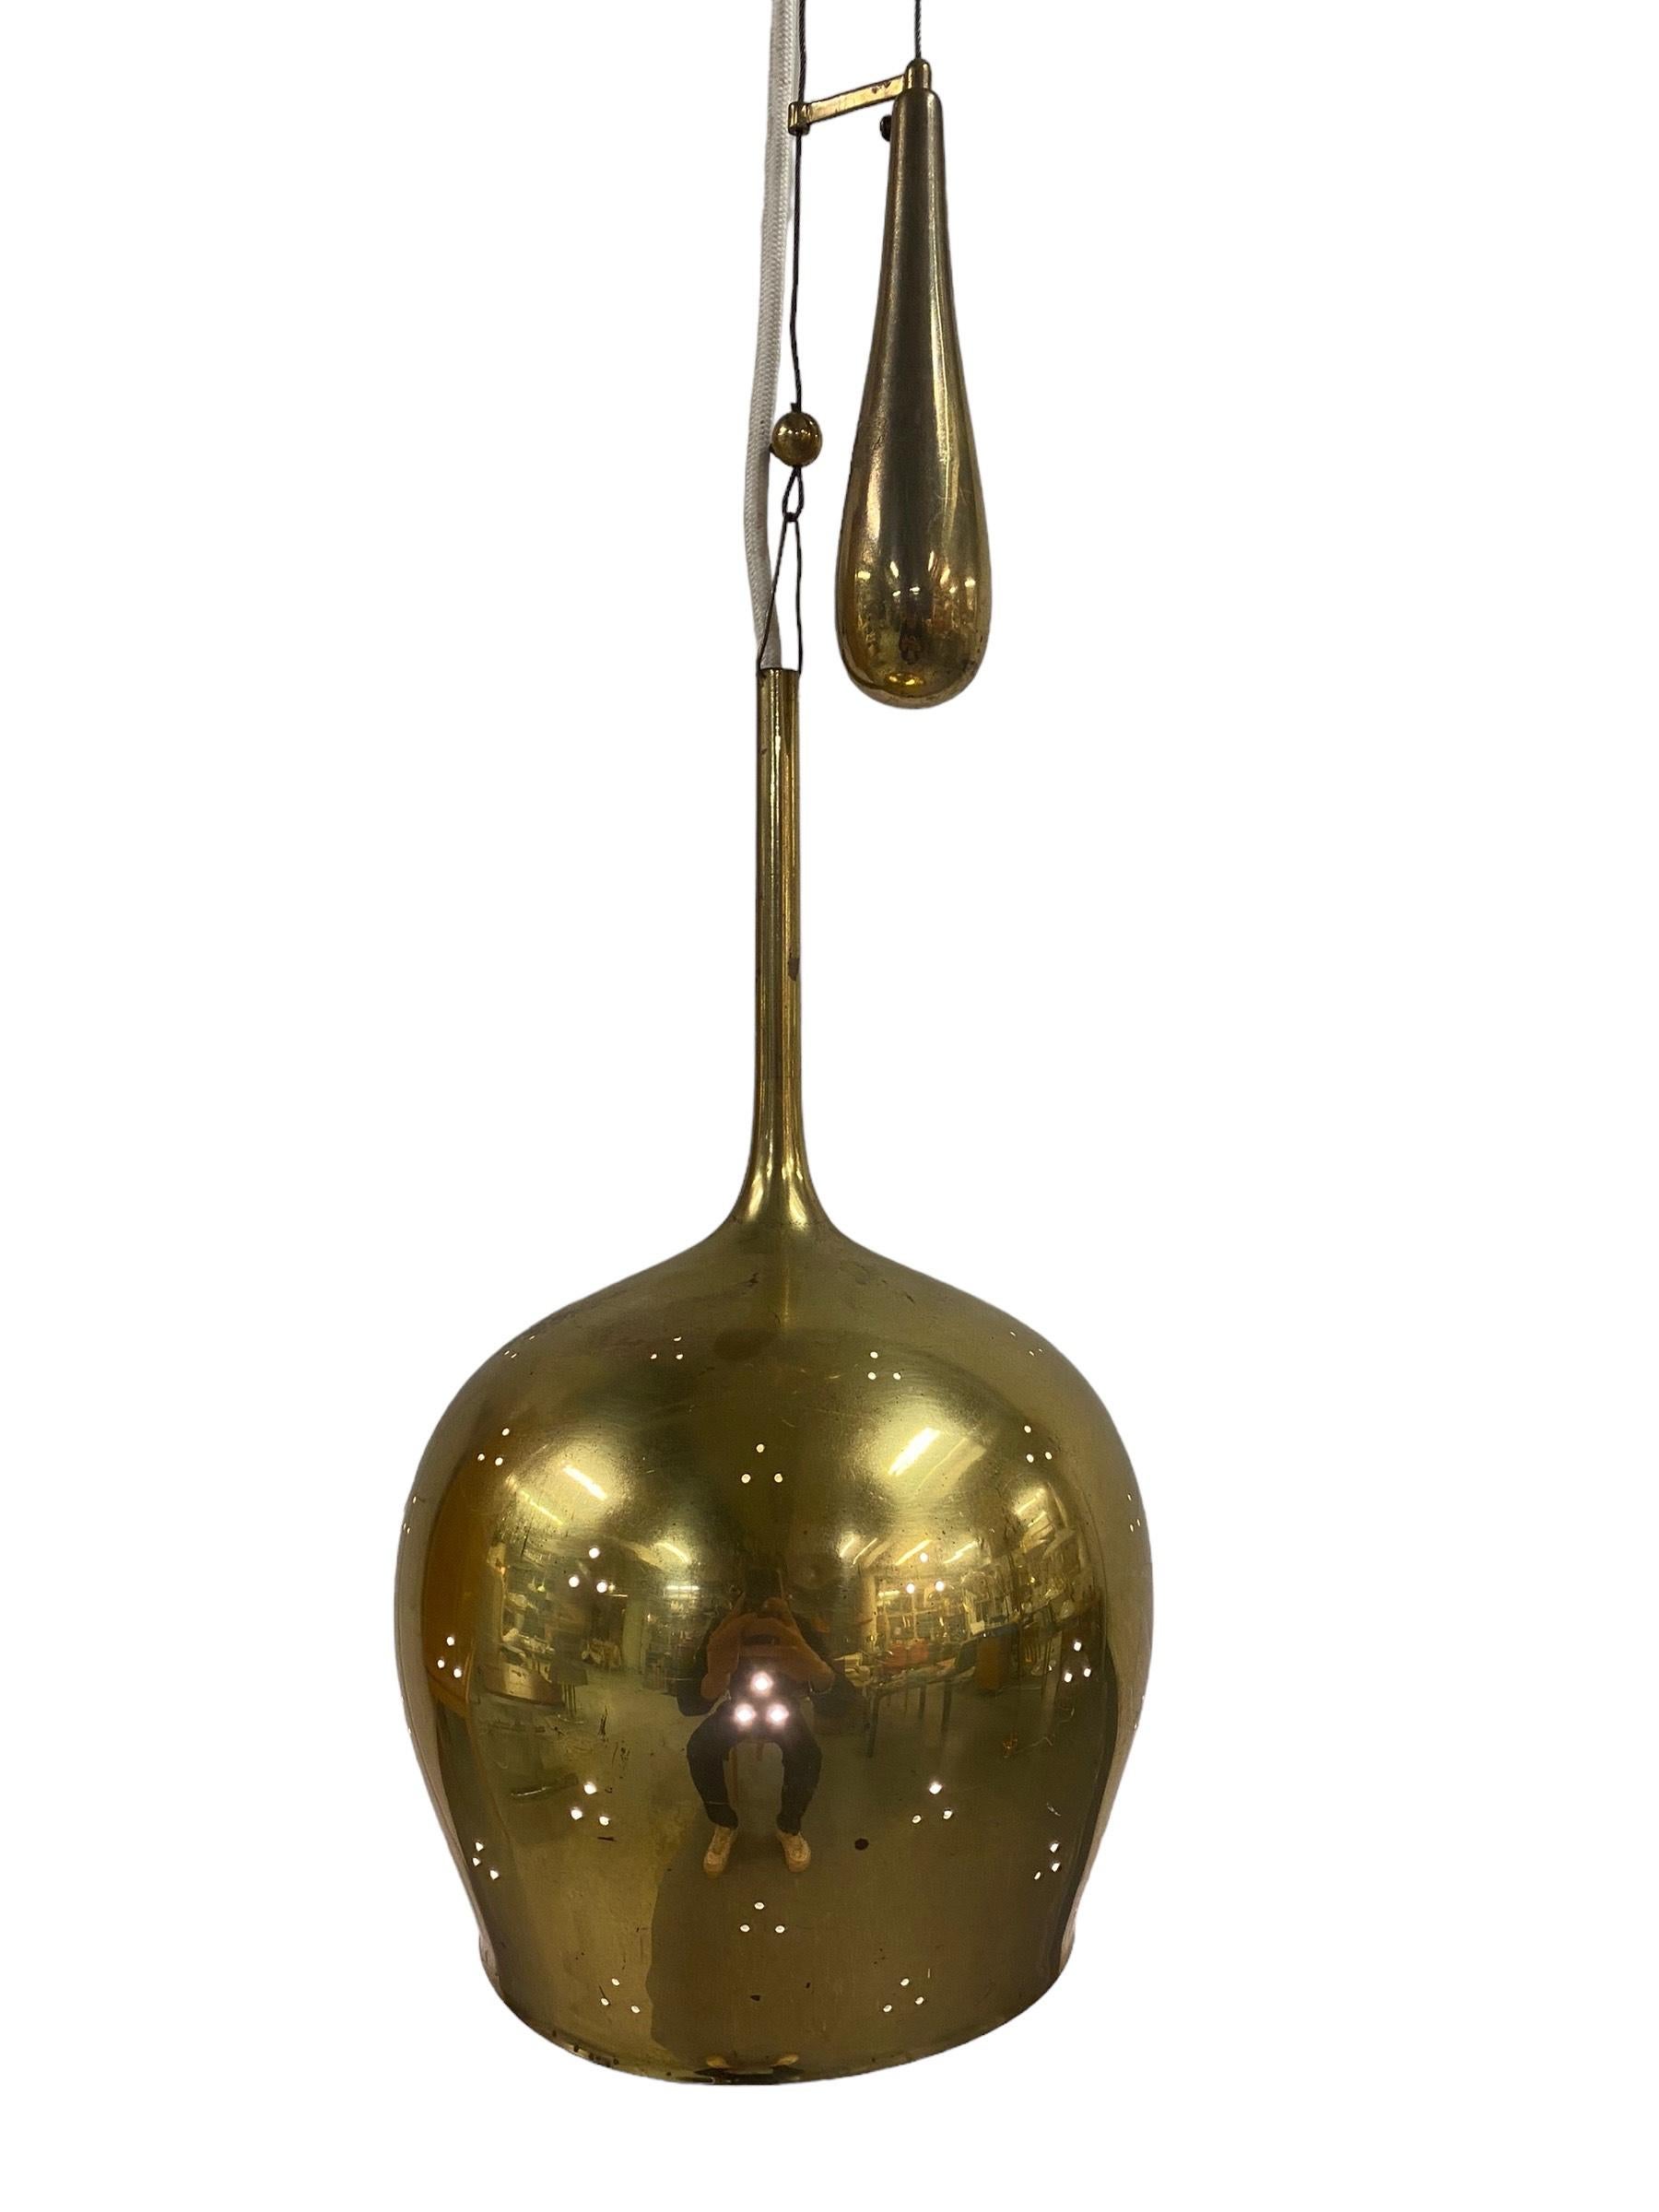 A beautiful and rare ceiling lamp in full brass. Designed by Paavo Tynell and manufactured by Taito Oy in Finland in the 1950s. This is one of Tynells nicest and most recognizable models. The iconic design of this lamp immediately catches your eye.